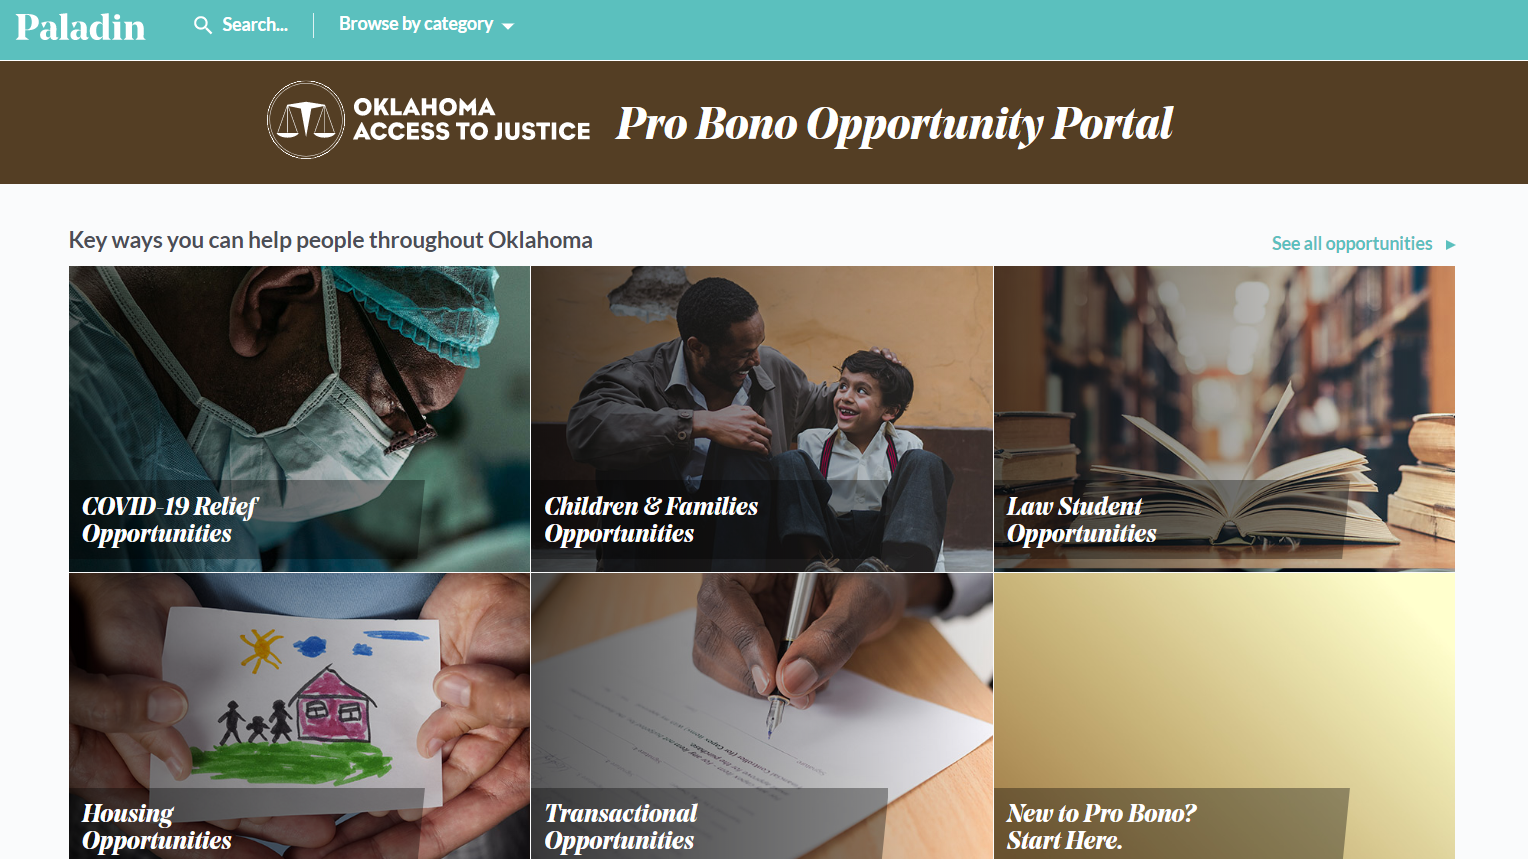 Oklahoma Launches Statewide Pro Bono Portal, with Help from Paladin